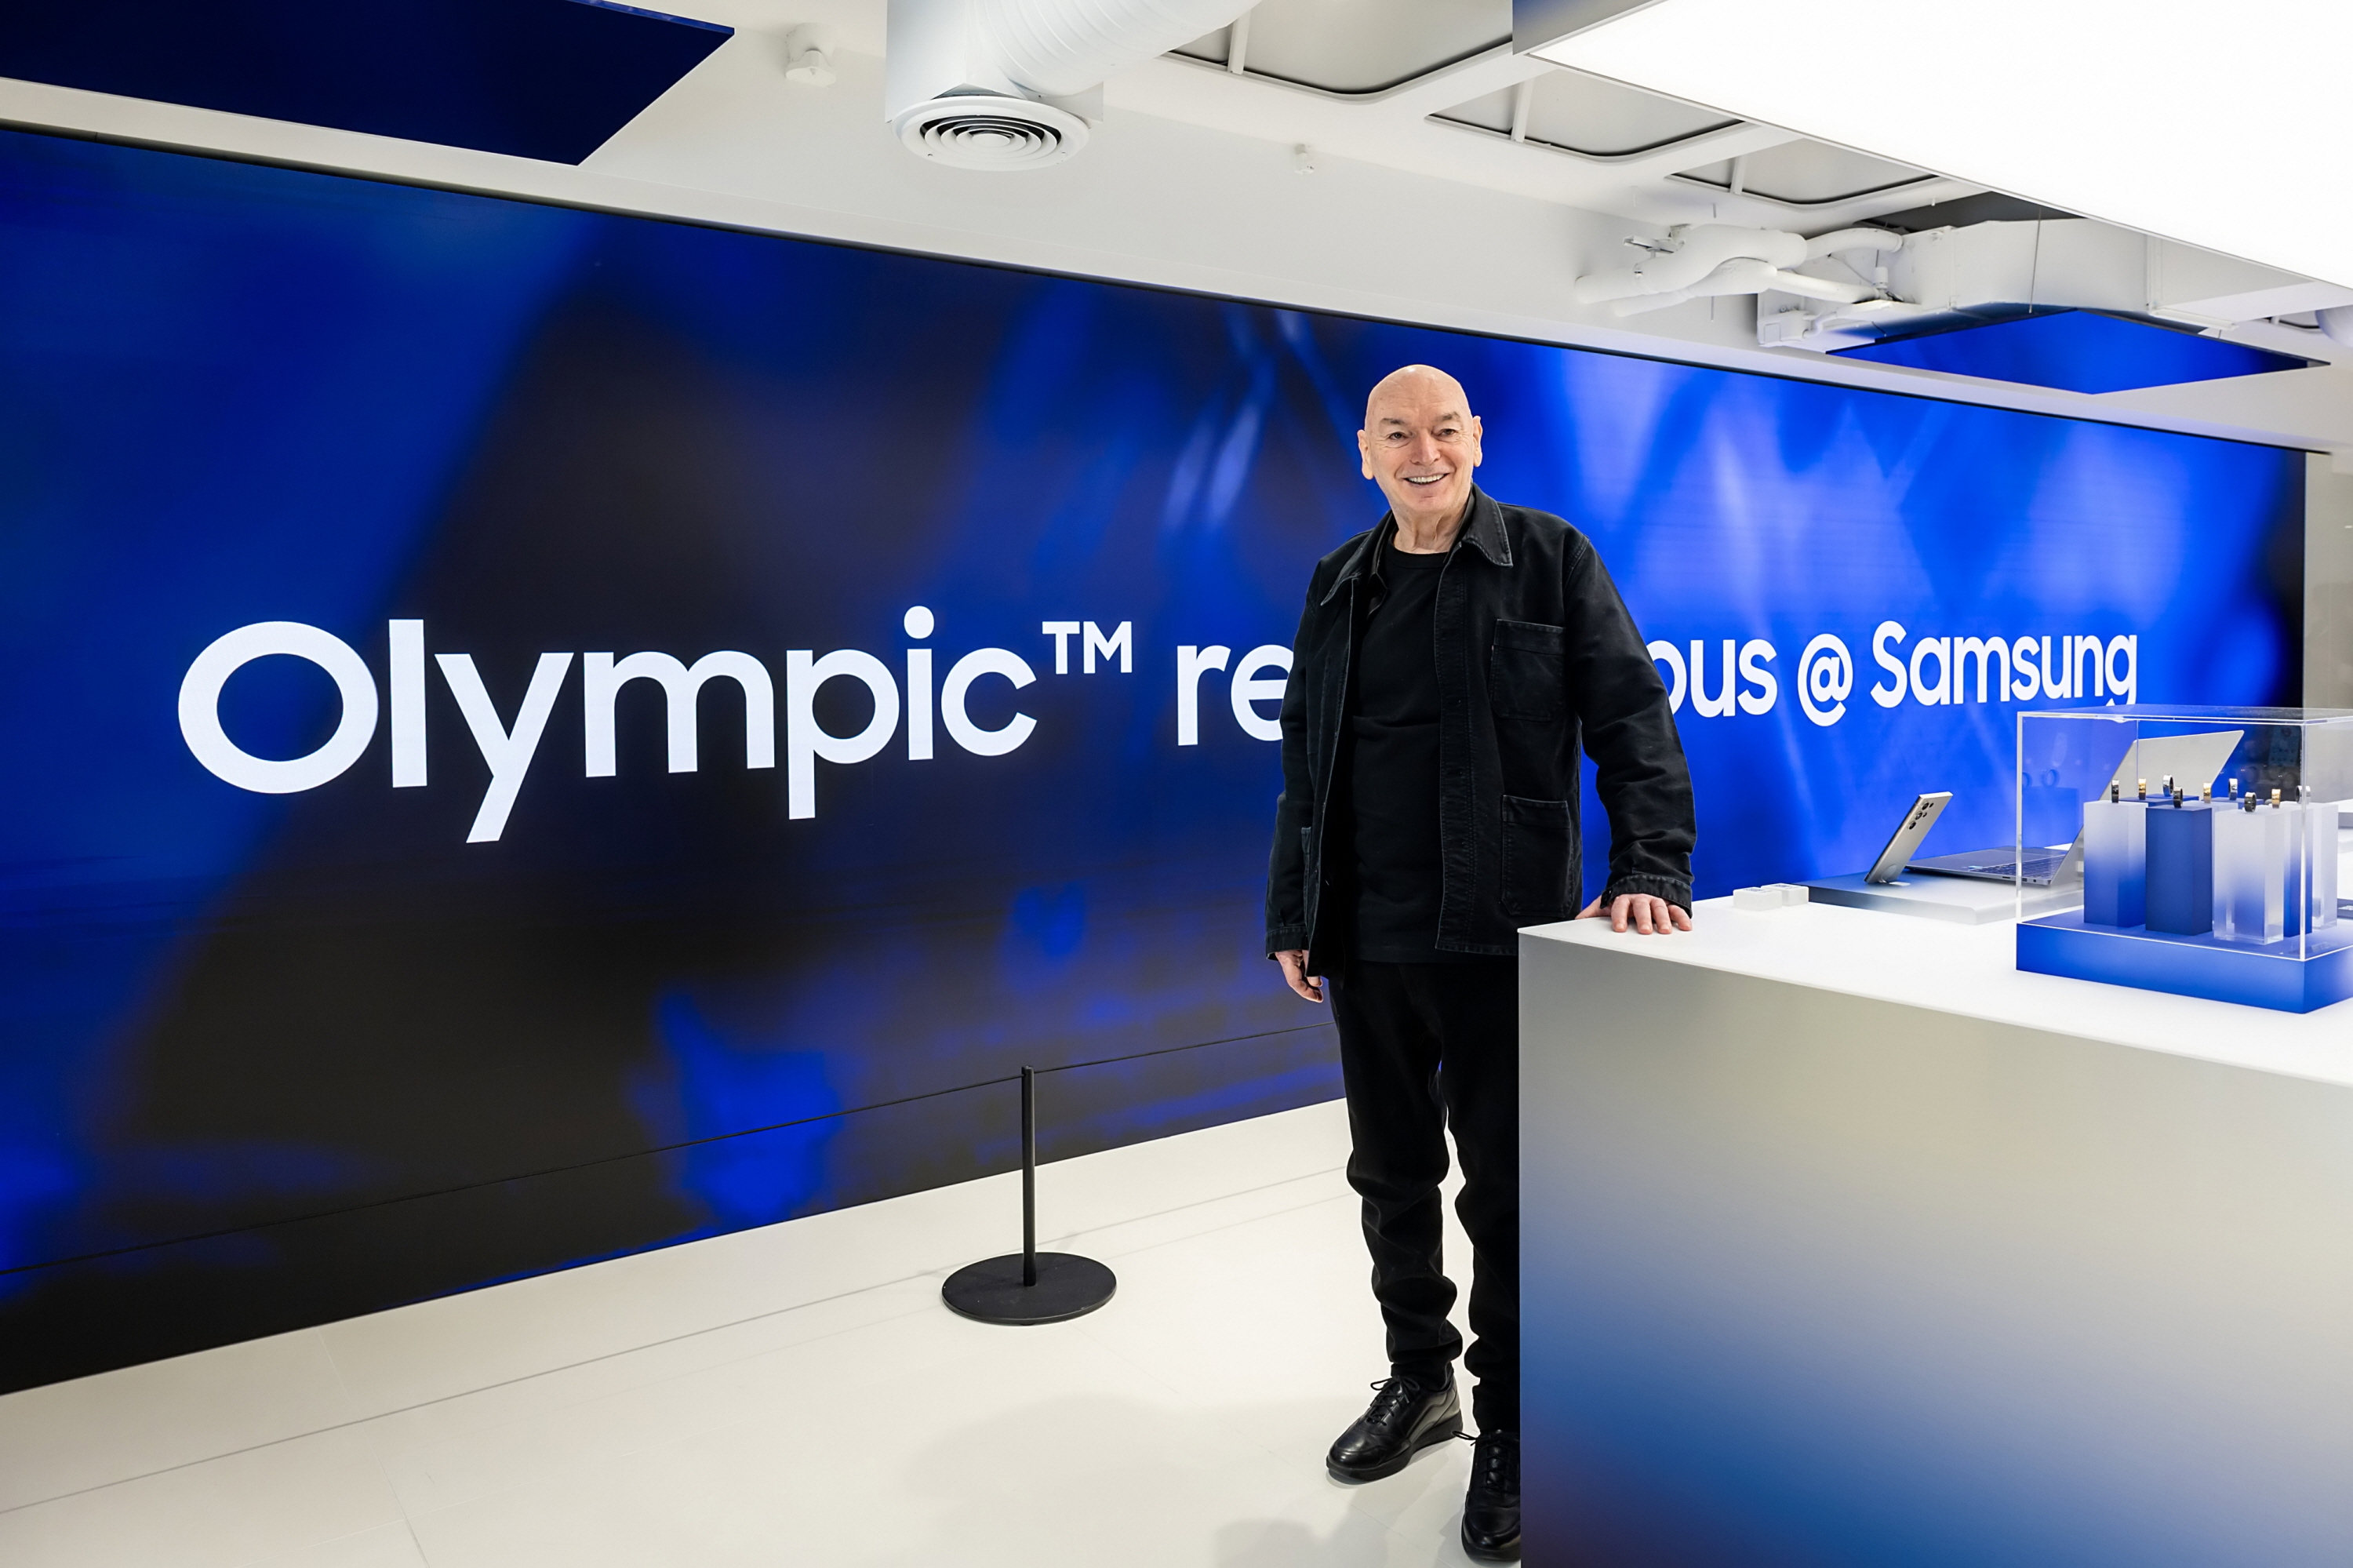 Olympic™ rendezvous @ Samsung_Jean Nouvel